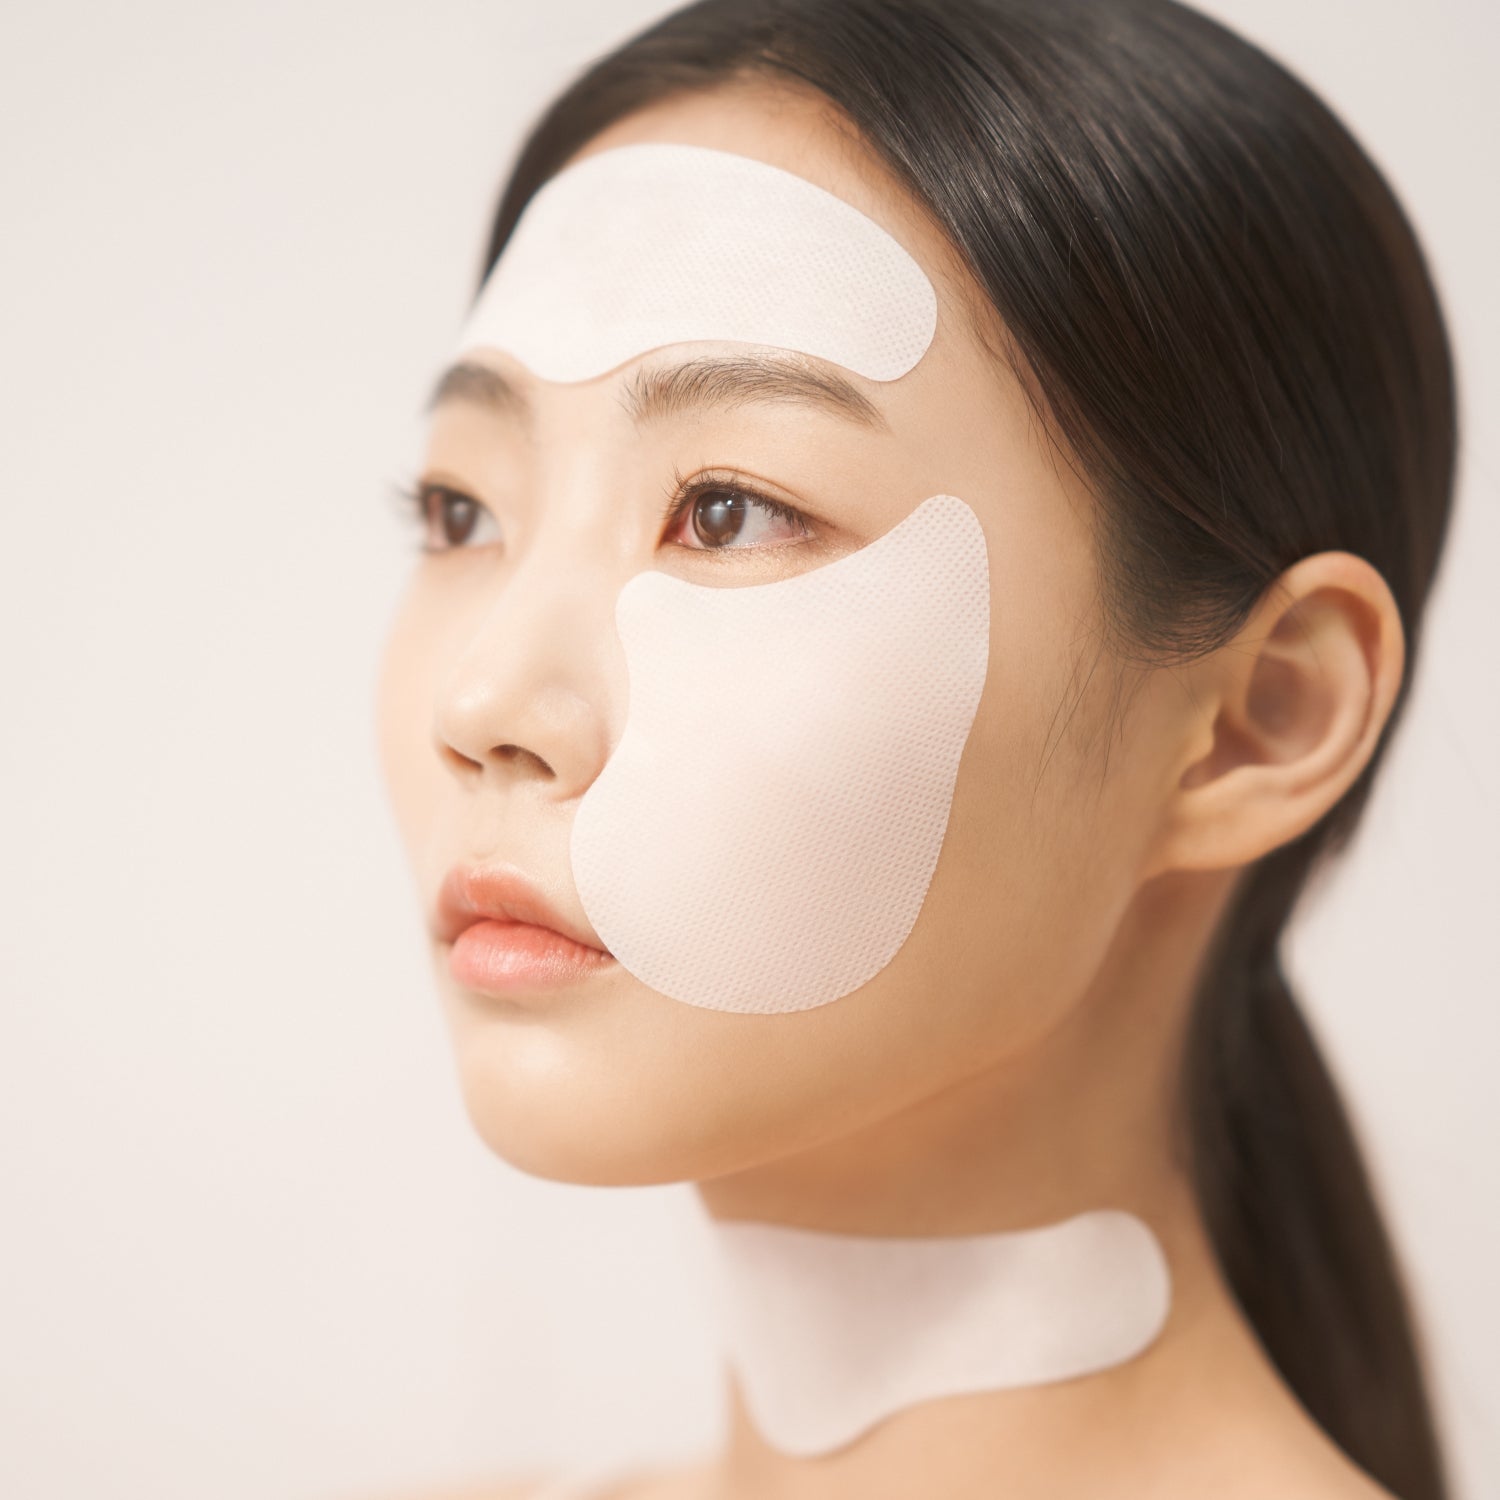 Vitalique Collagen Melting Patch for Cheek